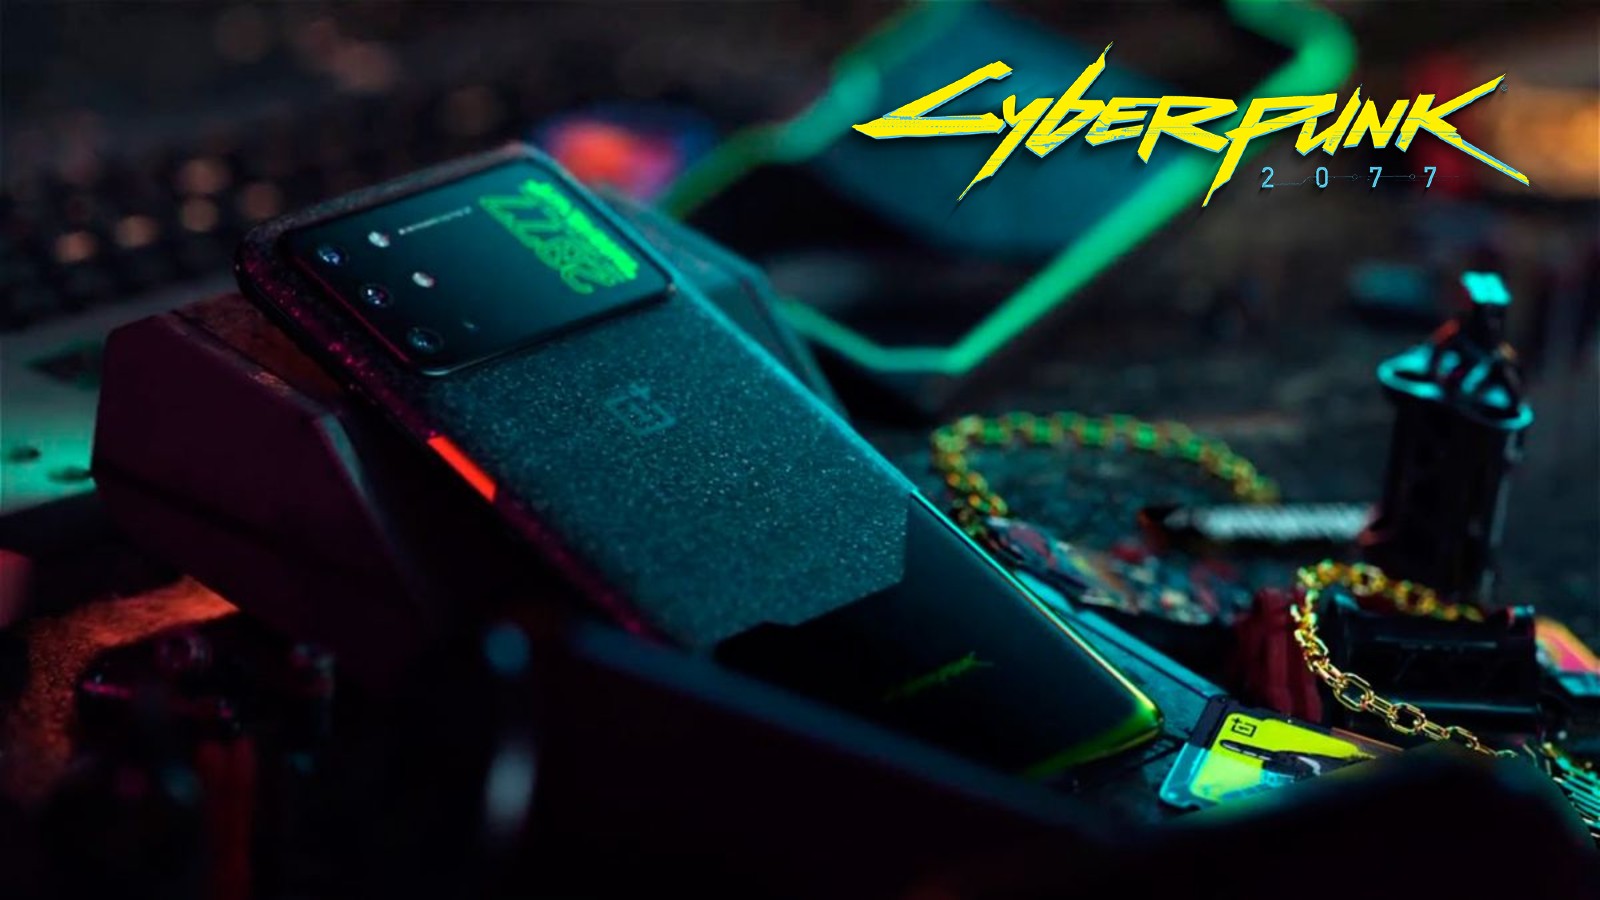 Unbox Therapy showcases the incredible OnePlus Cyberpunk 2077 phone -  Dexerto